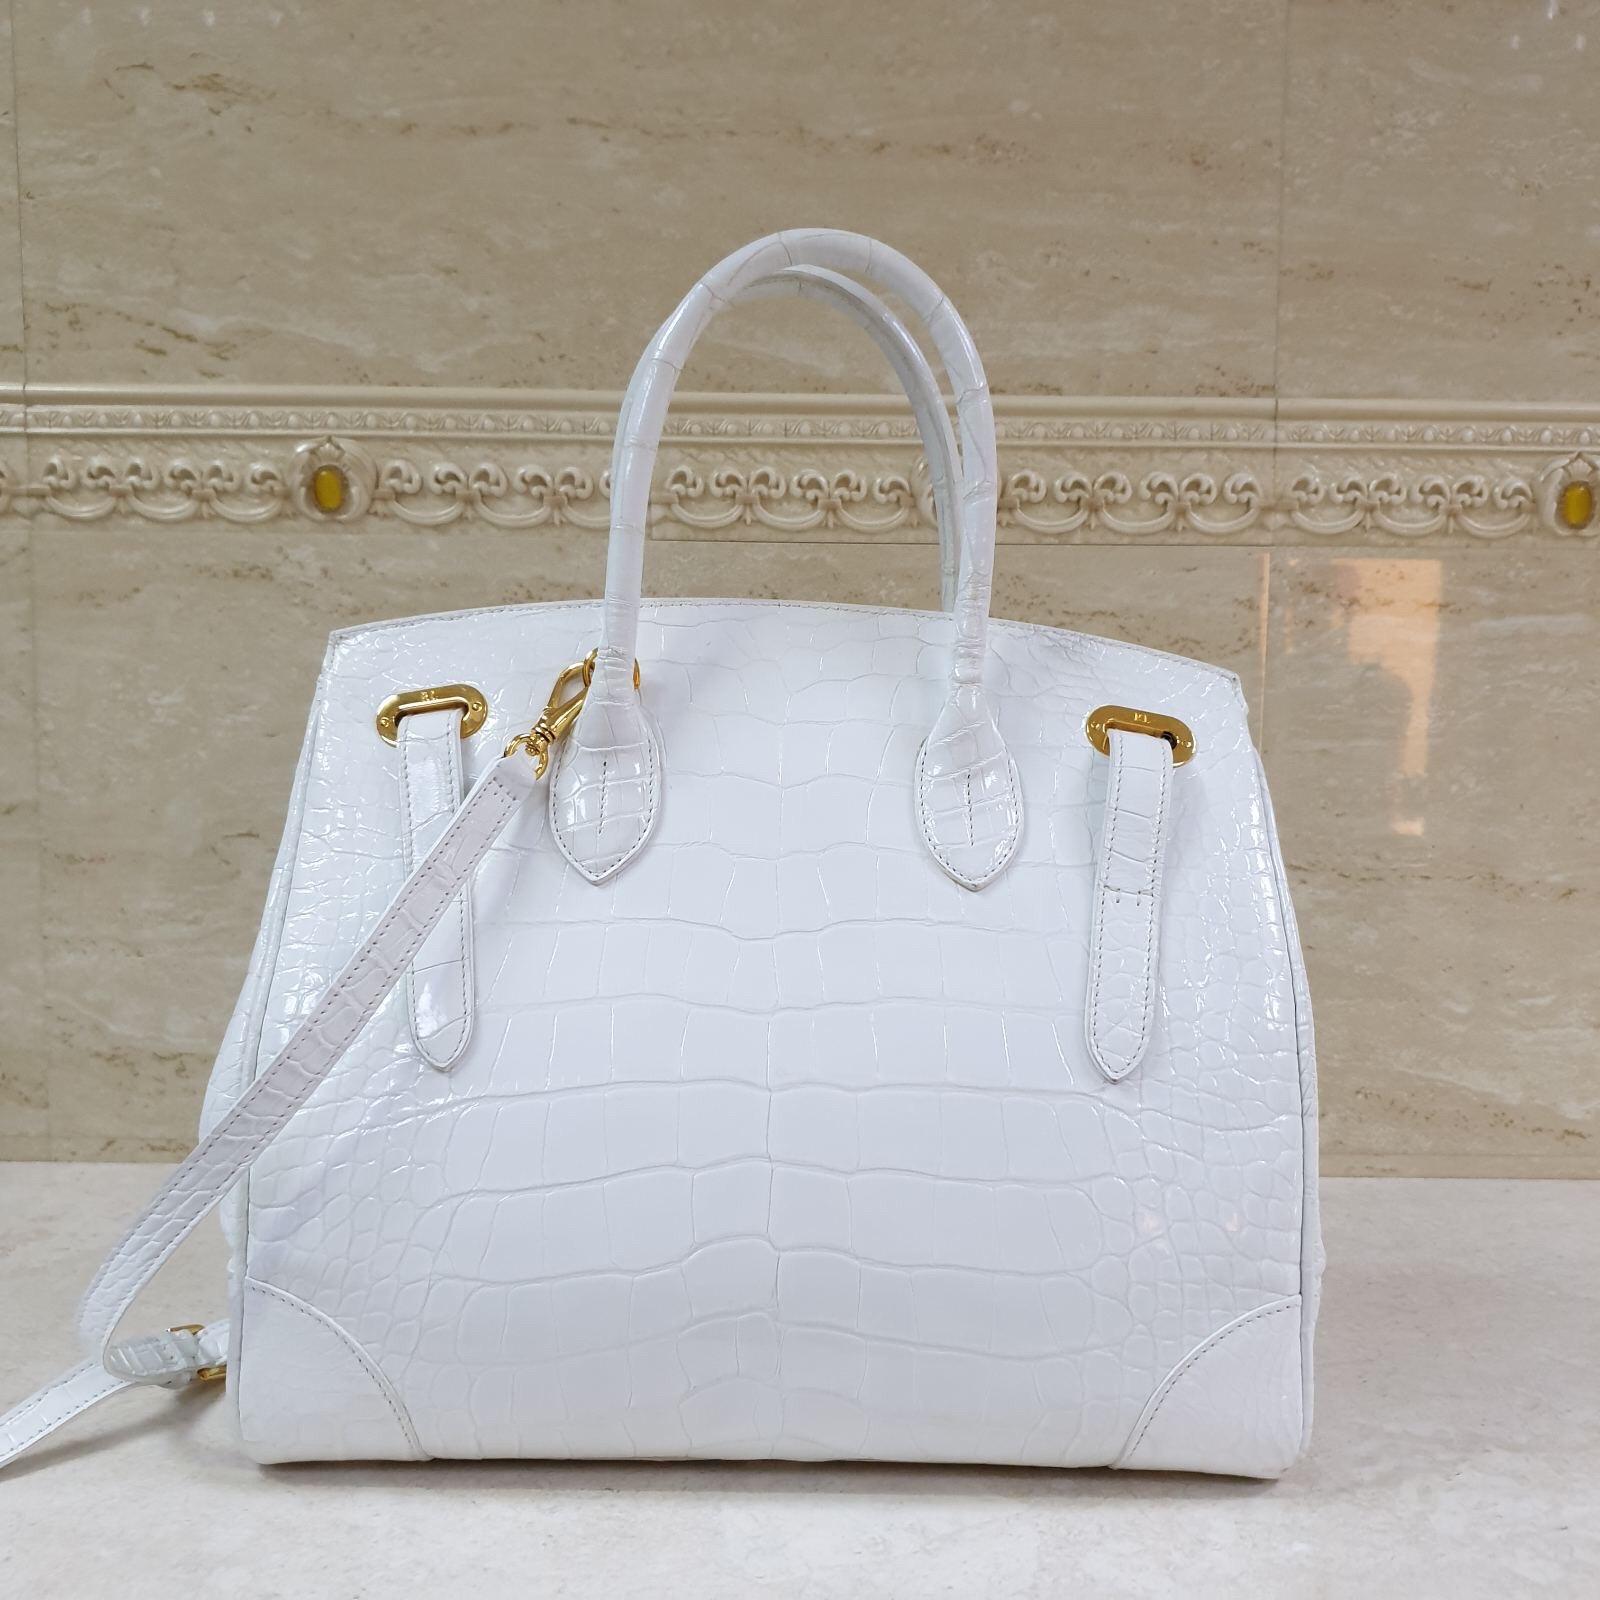 This Ralph Lauren Ricky bag is simply breathtaking and ideal to complement your elegant personality. Meticulously crafted from exotic alligator skin, the bag has an intriguing visual and tactile finish which makes it all the more appealing. It